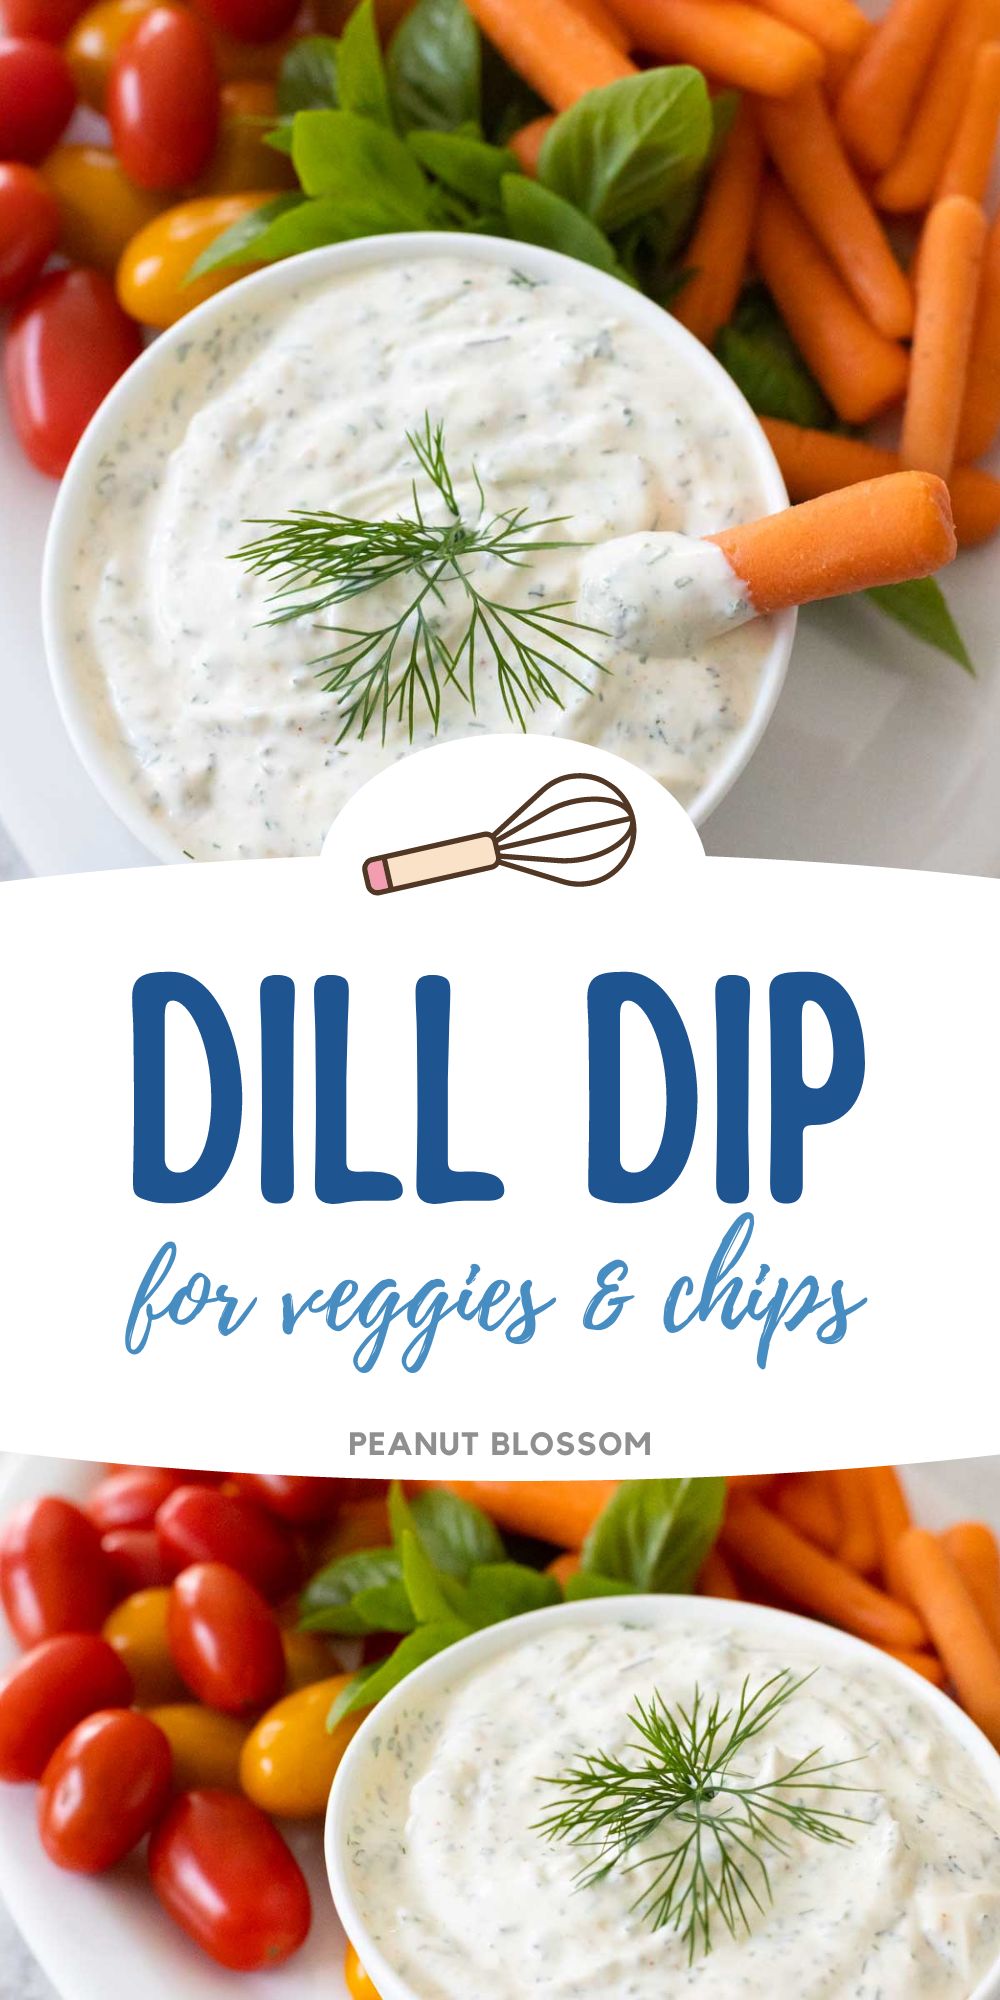 The photo collage shows the bowl of dill dip with a sprig of fresh dill on top and a baby carrot dunking it.